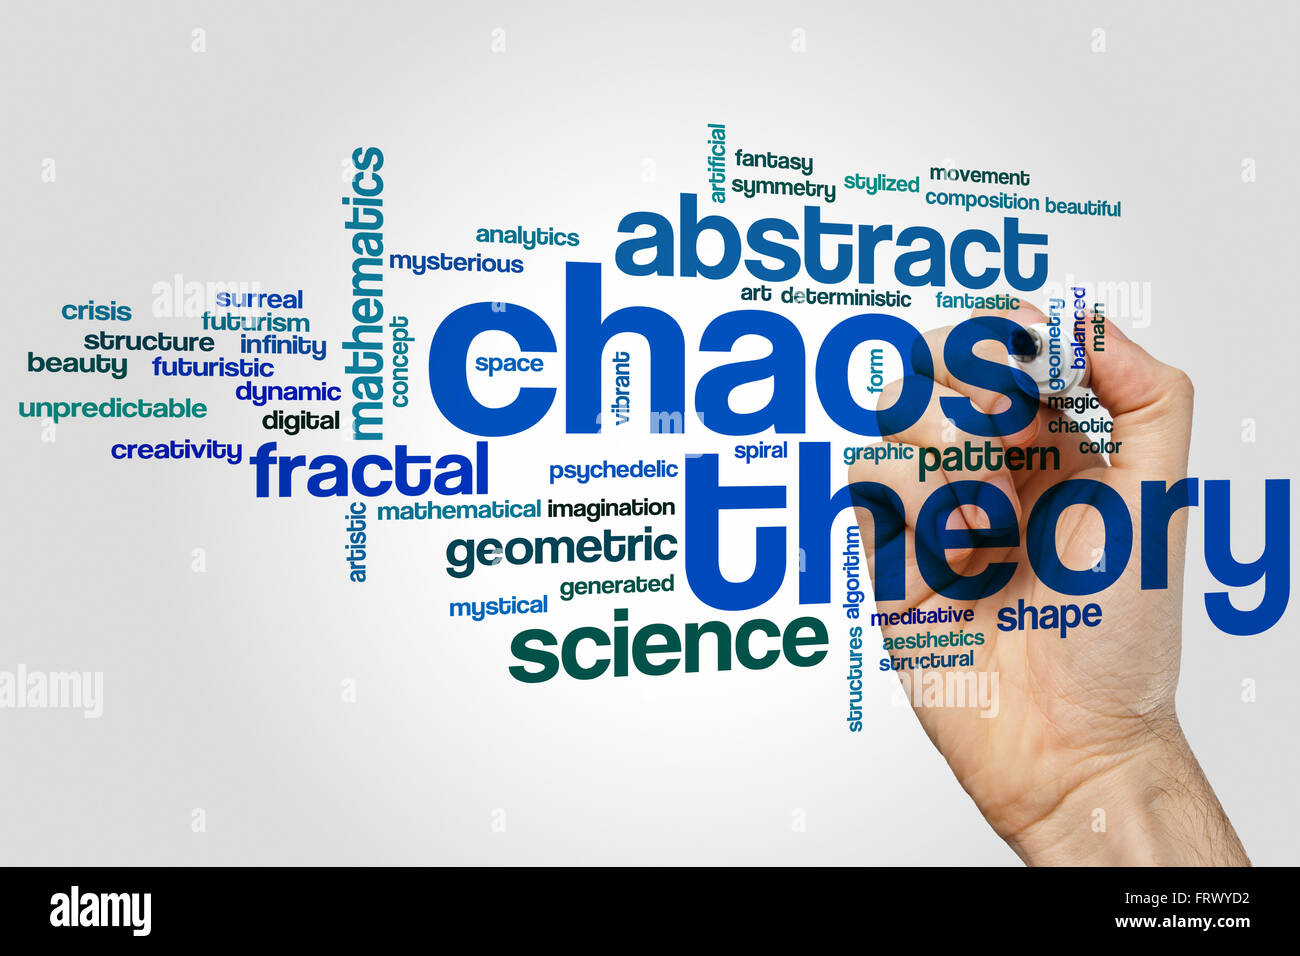 Chaos theory word cloud concept Stock Photo